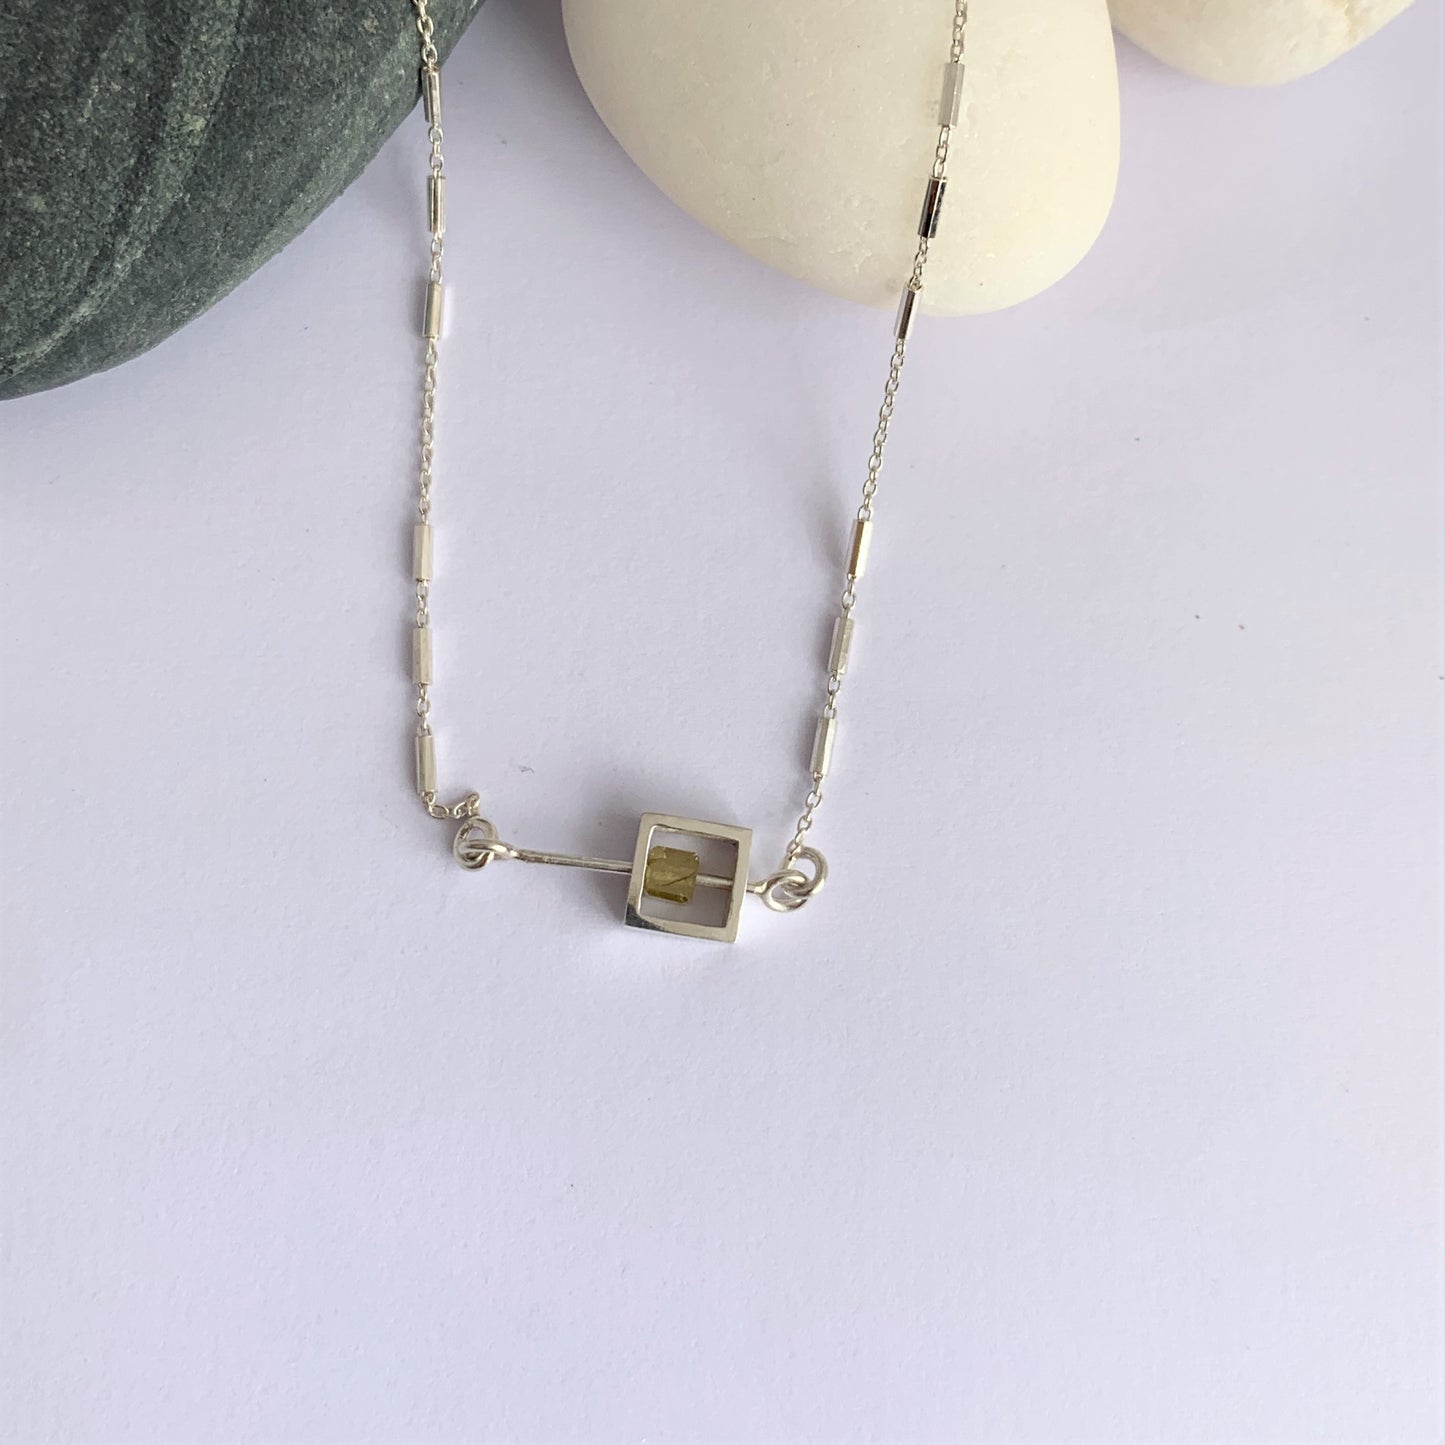 Solo Diamond Bead moving on a silver rod necklace